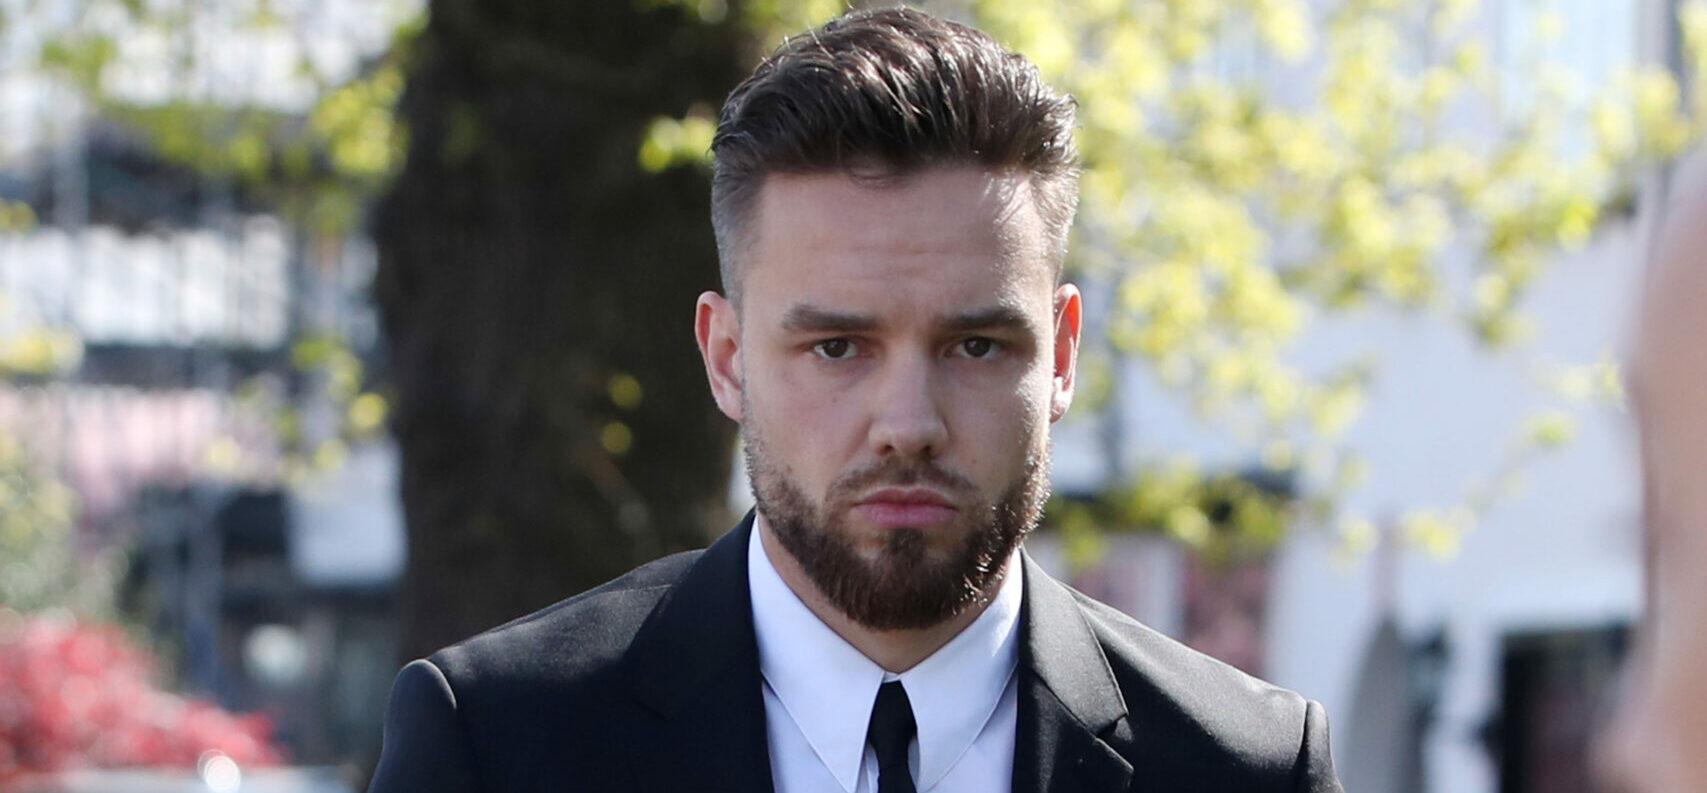 Engaged Liam Payne Spotted Getting Handsy With Another Woman!